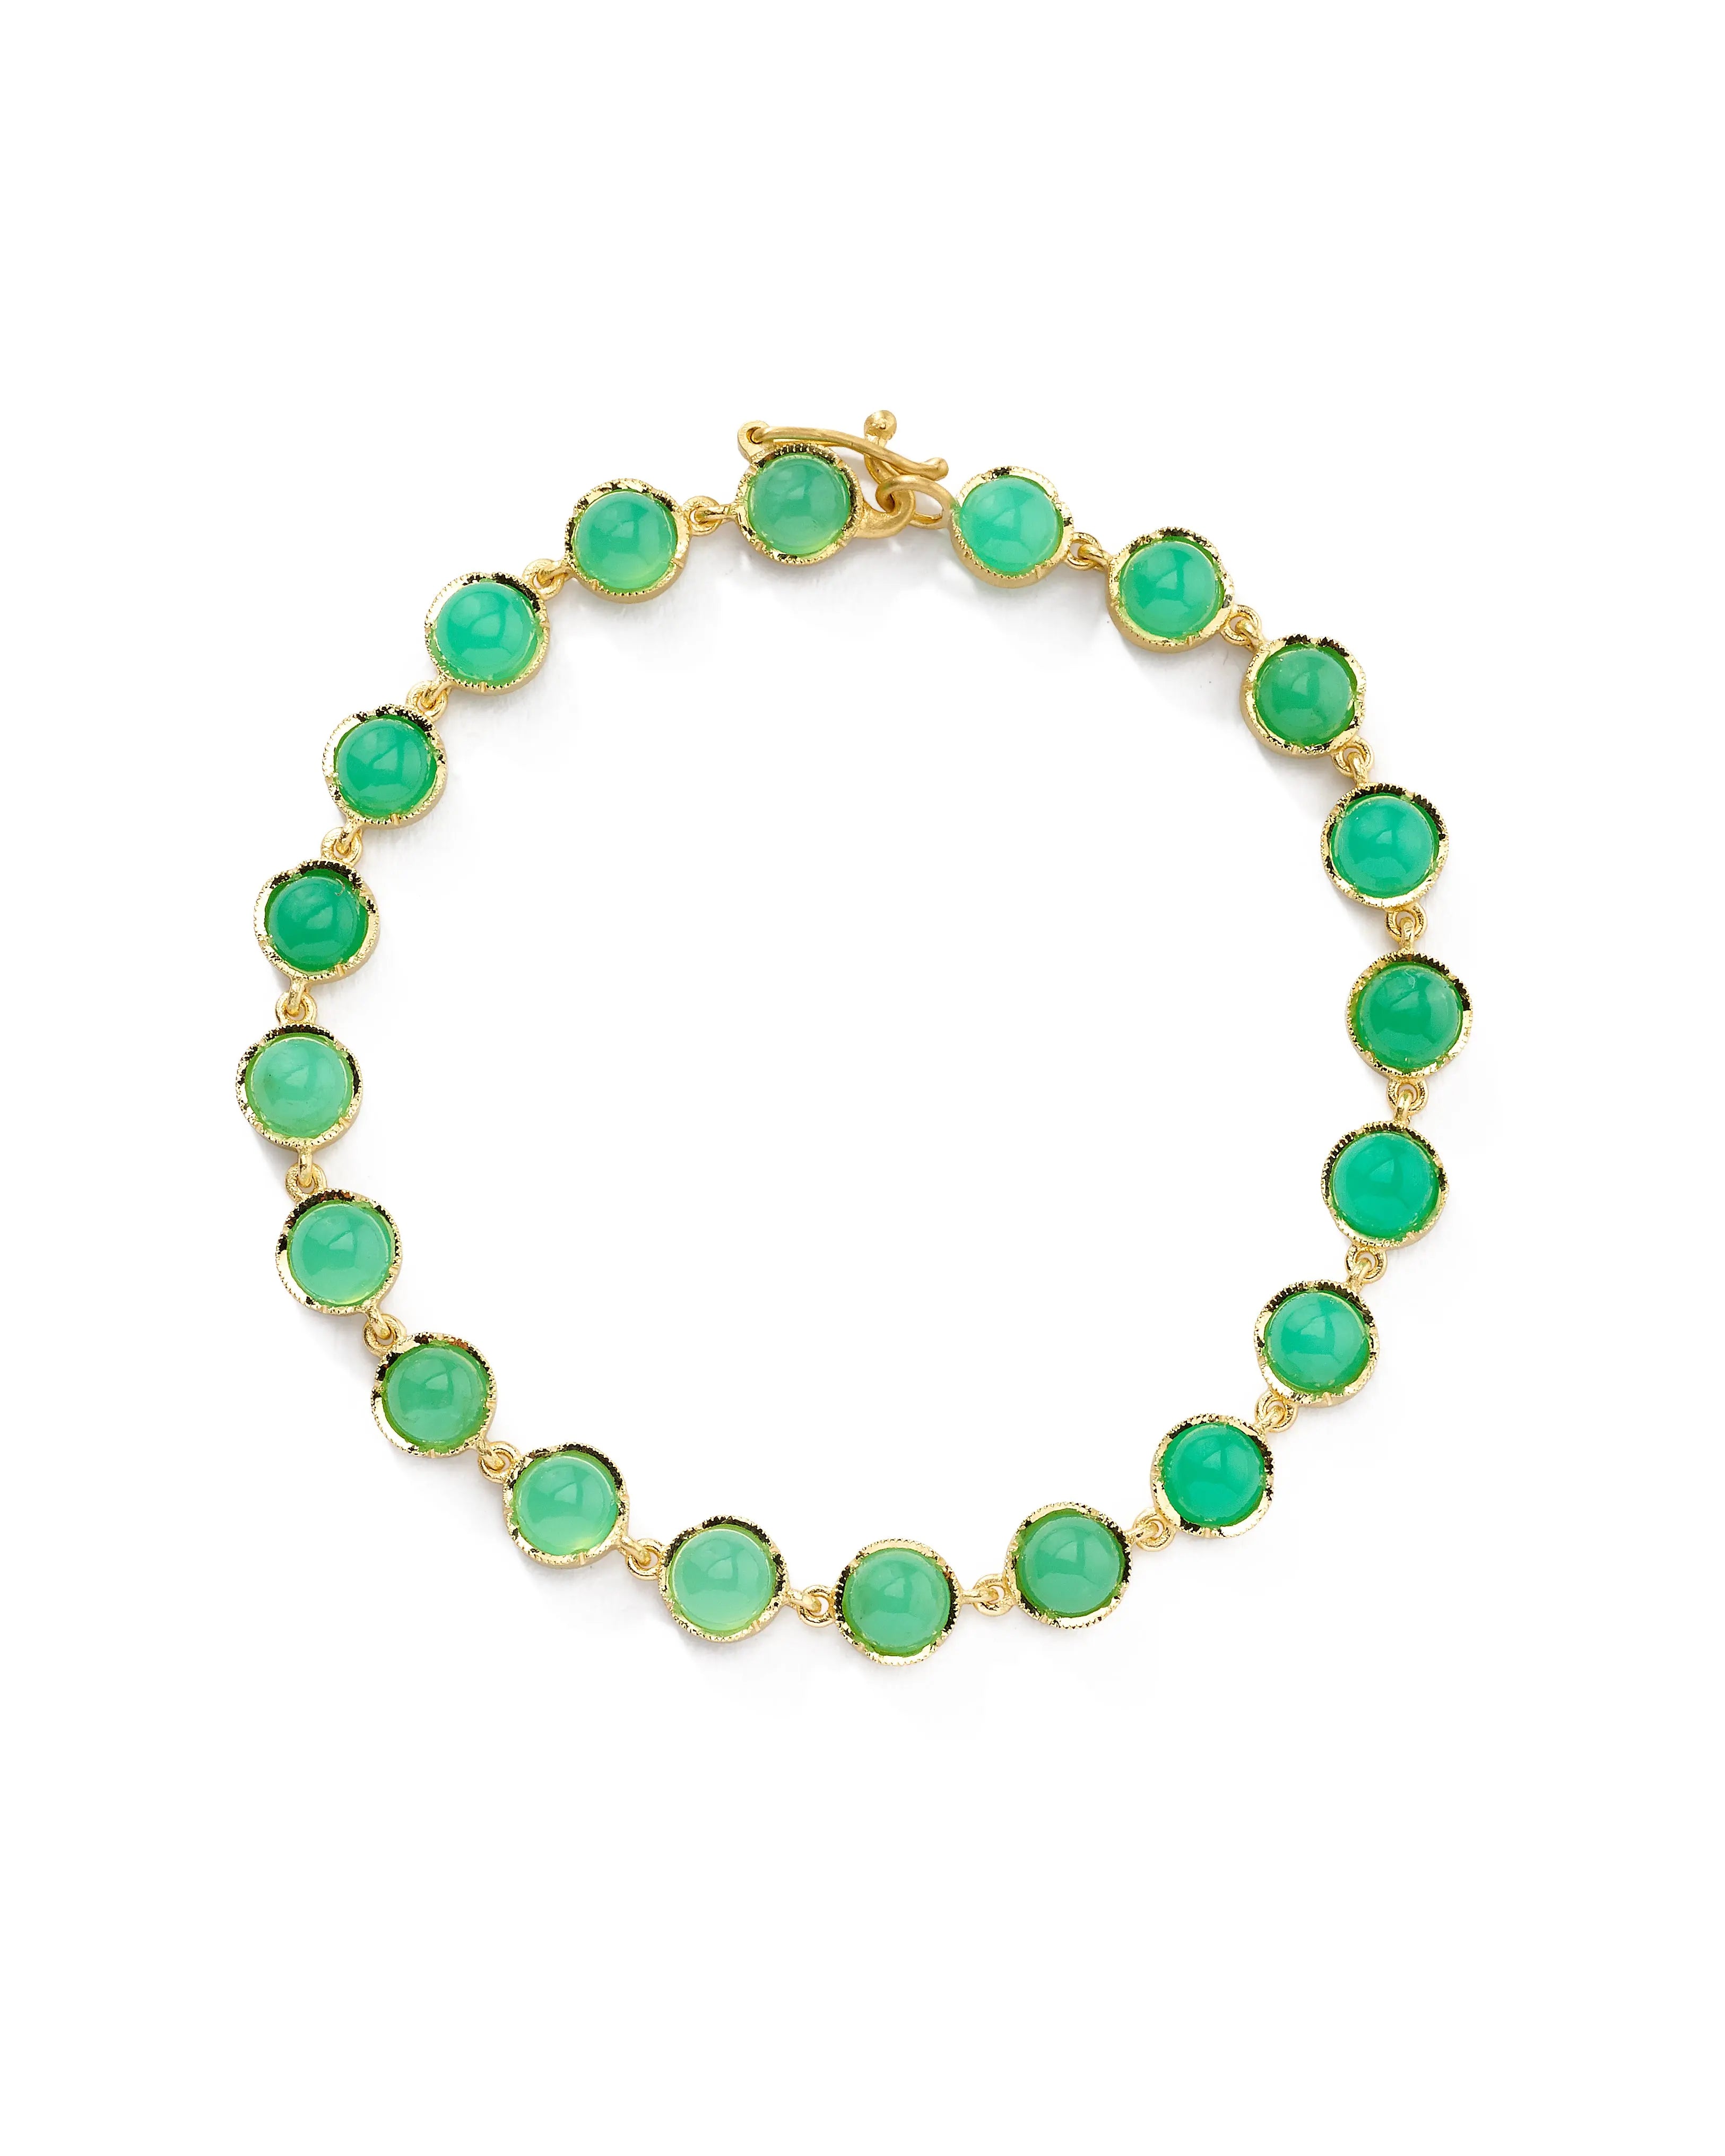 18k Yellow Gold Chrysoprase 5mm Bracelet  18k yellow gold Chrysoprase 7 inches in length Designed and handmade in Los Angeles If an item is out of stock, please allow 3-5 weeks for delivery  Designed by Irene Neuwirth